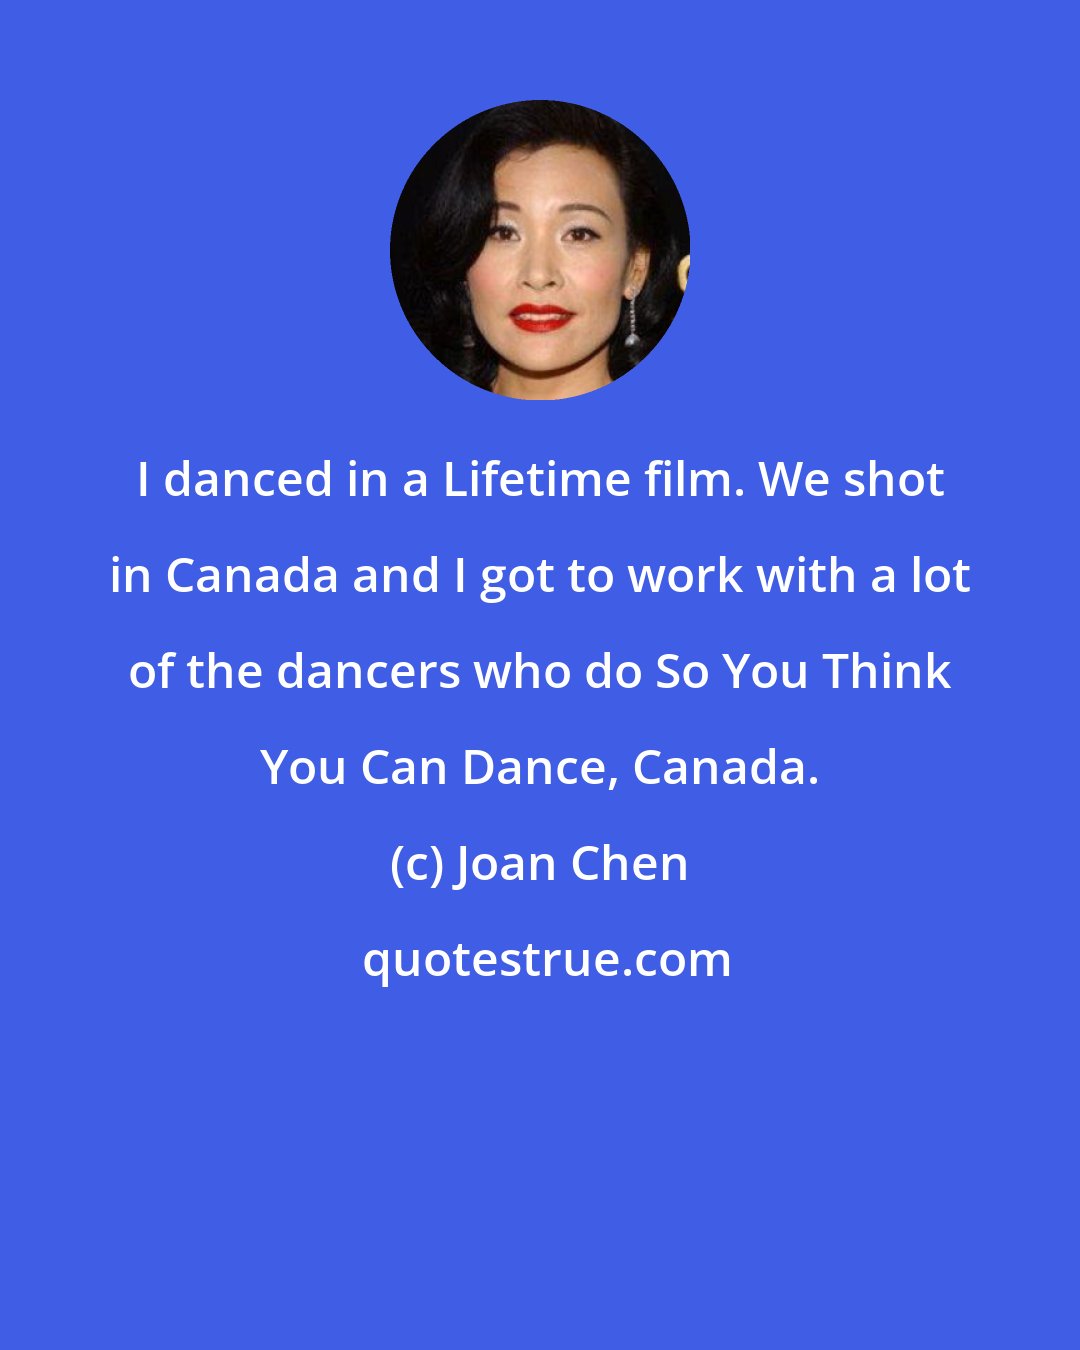 Joan Chen: I danced in a Lifetime film. We shot in Canada and I got to work with a lot of the dancers who do So You Think You Can Dance, Canada.